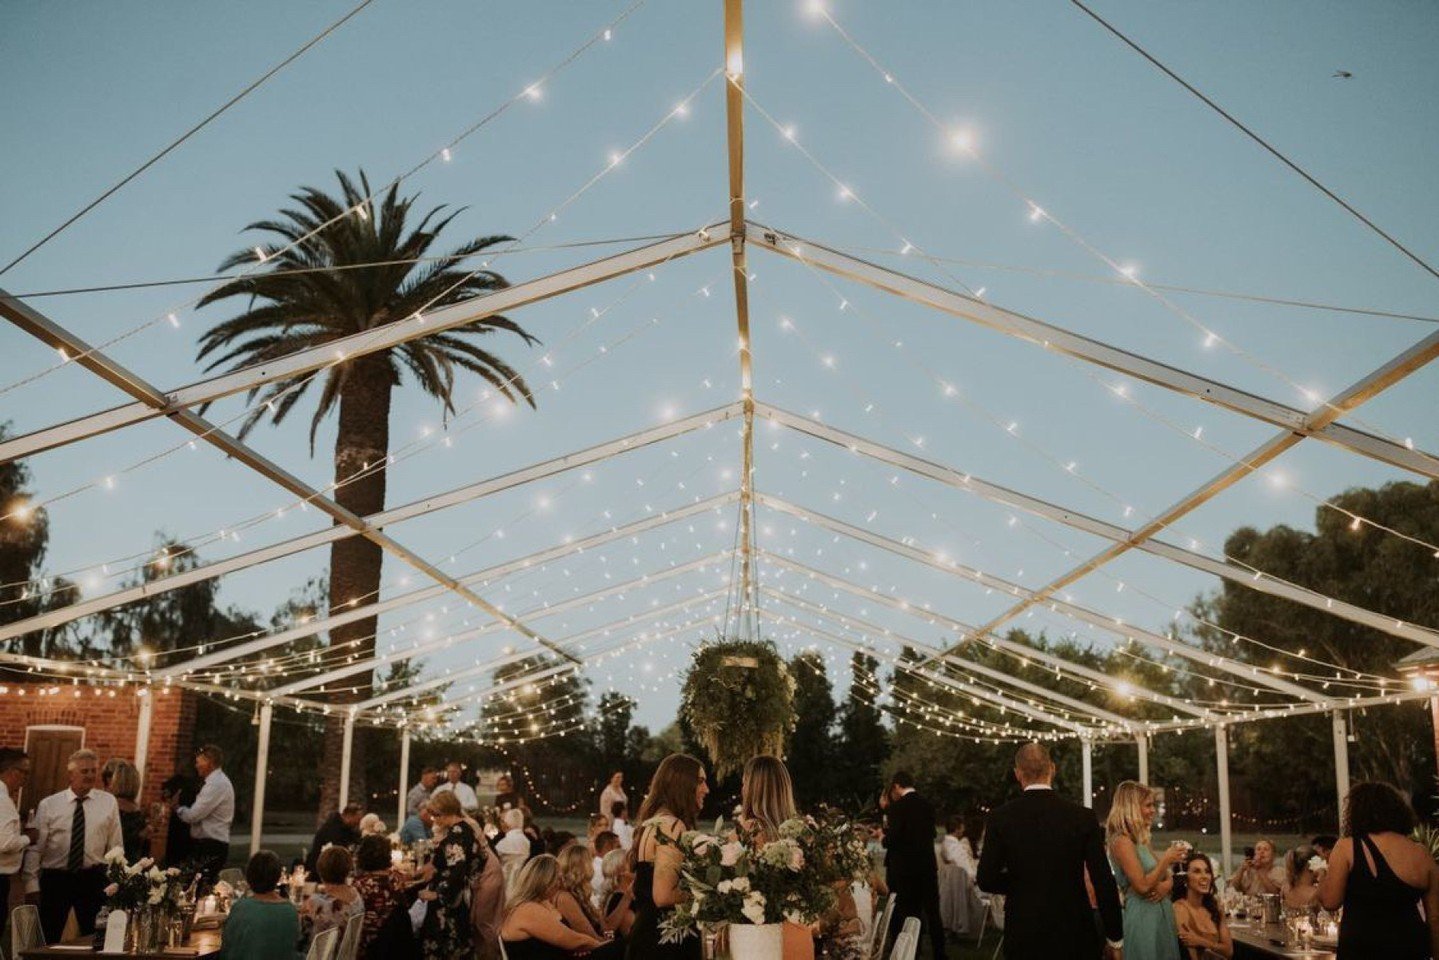 Fairy lights add the perfect touch of magic to this open air marquee wedding!!

Dinning under a canopy of twinkling lights and stars at the beautiful @moirastation, surrounded by your loved ones, sounds like the perfect evening!

Venue: @moira_statio